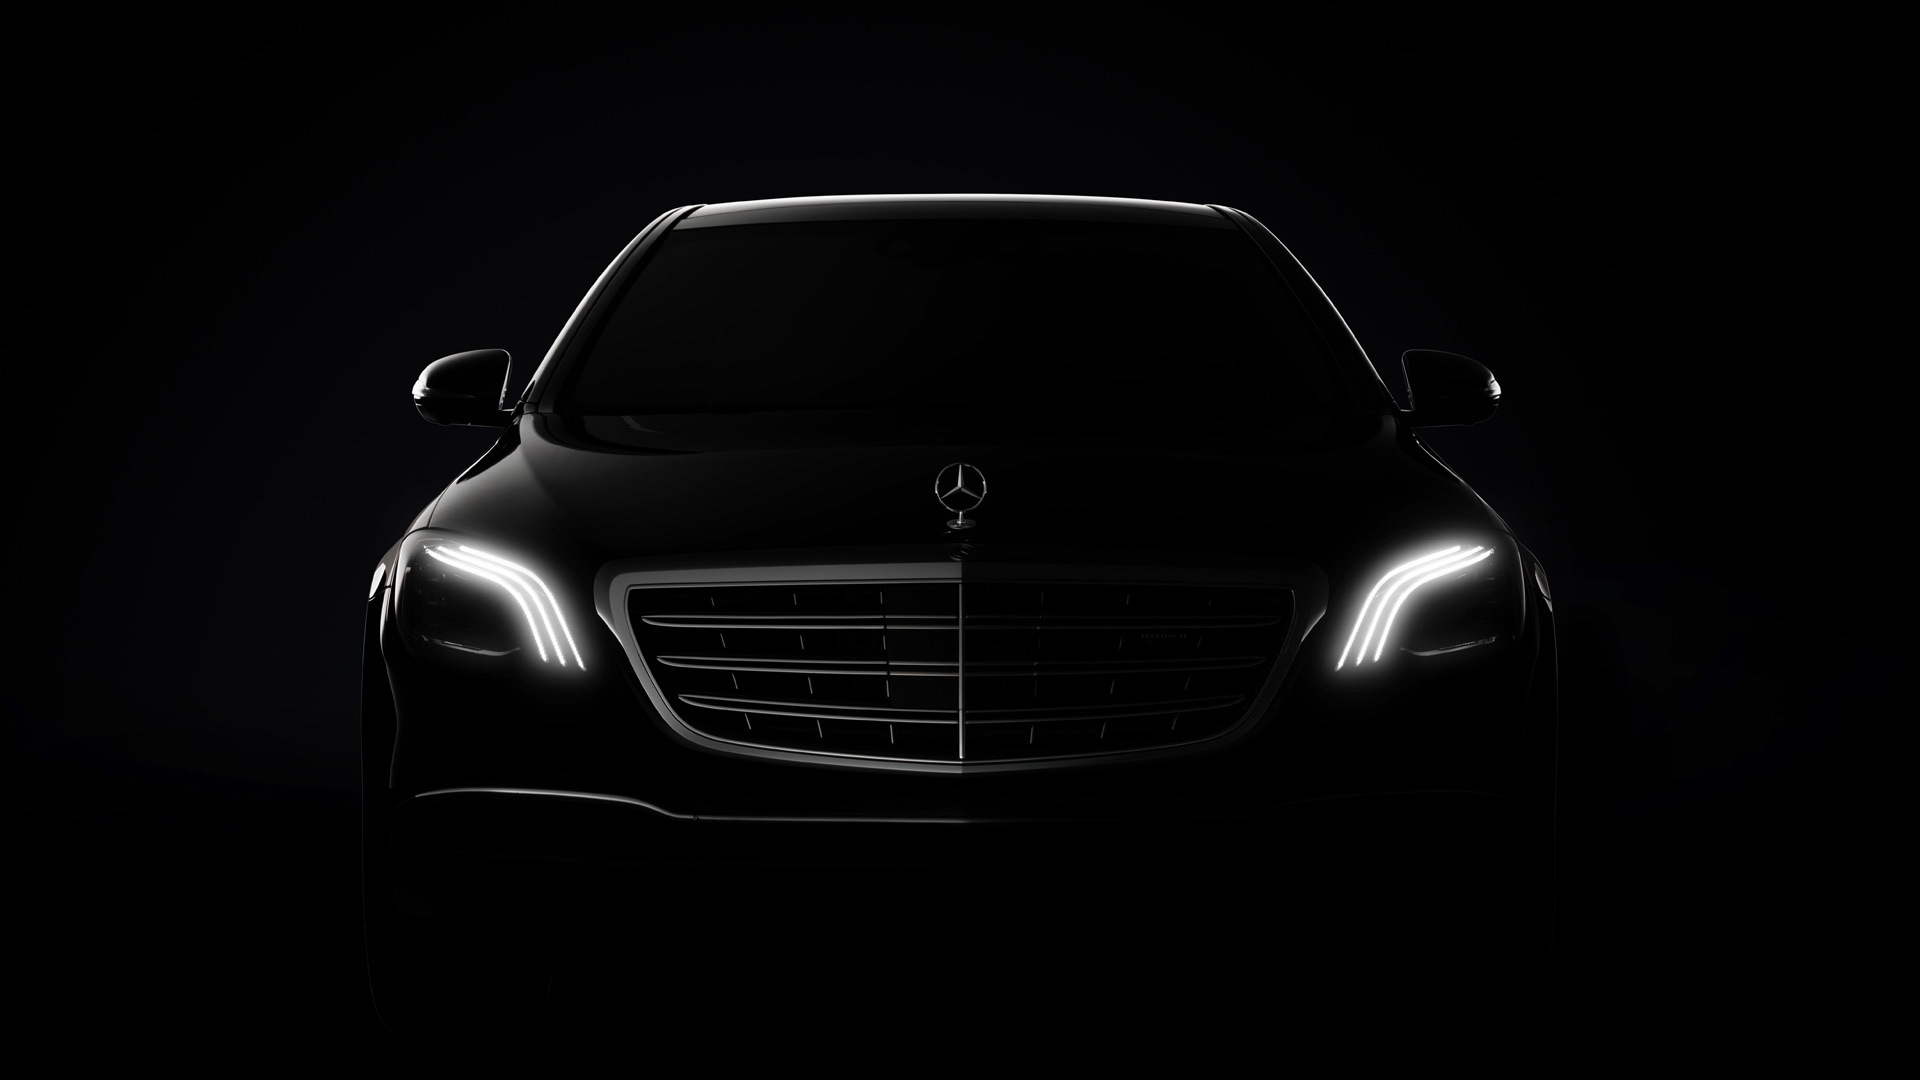 Teaser for 2018 Mercedes-Benz S-Class debuting at 2017 Shanghai auto show